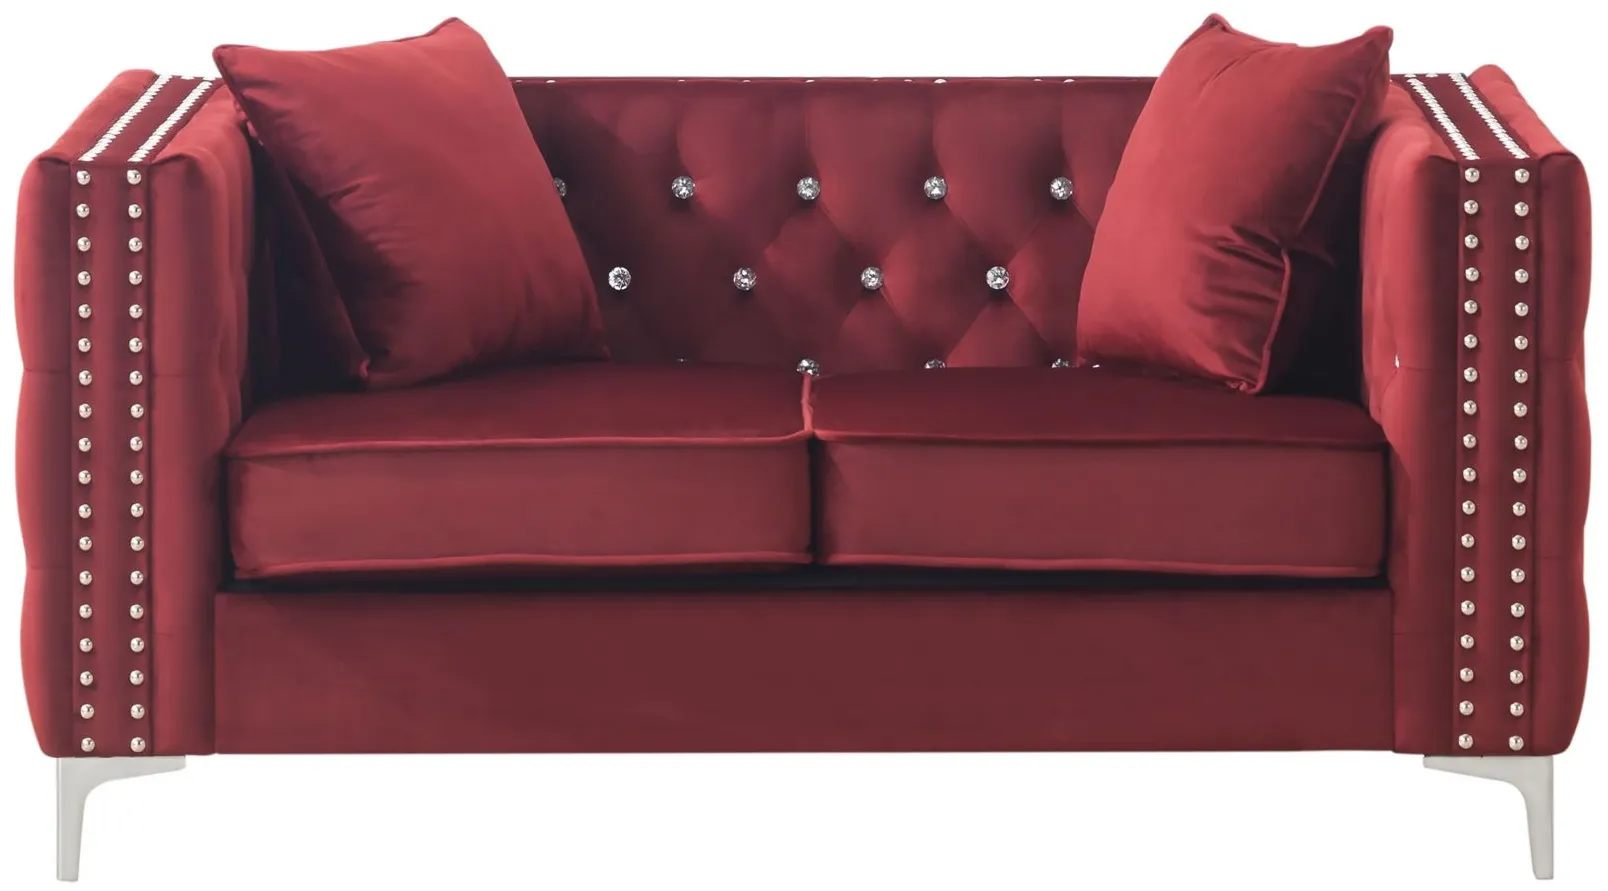 Paige Loveseat in Burgundy by Glory Furniture